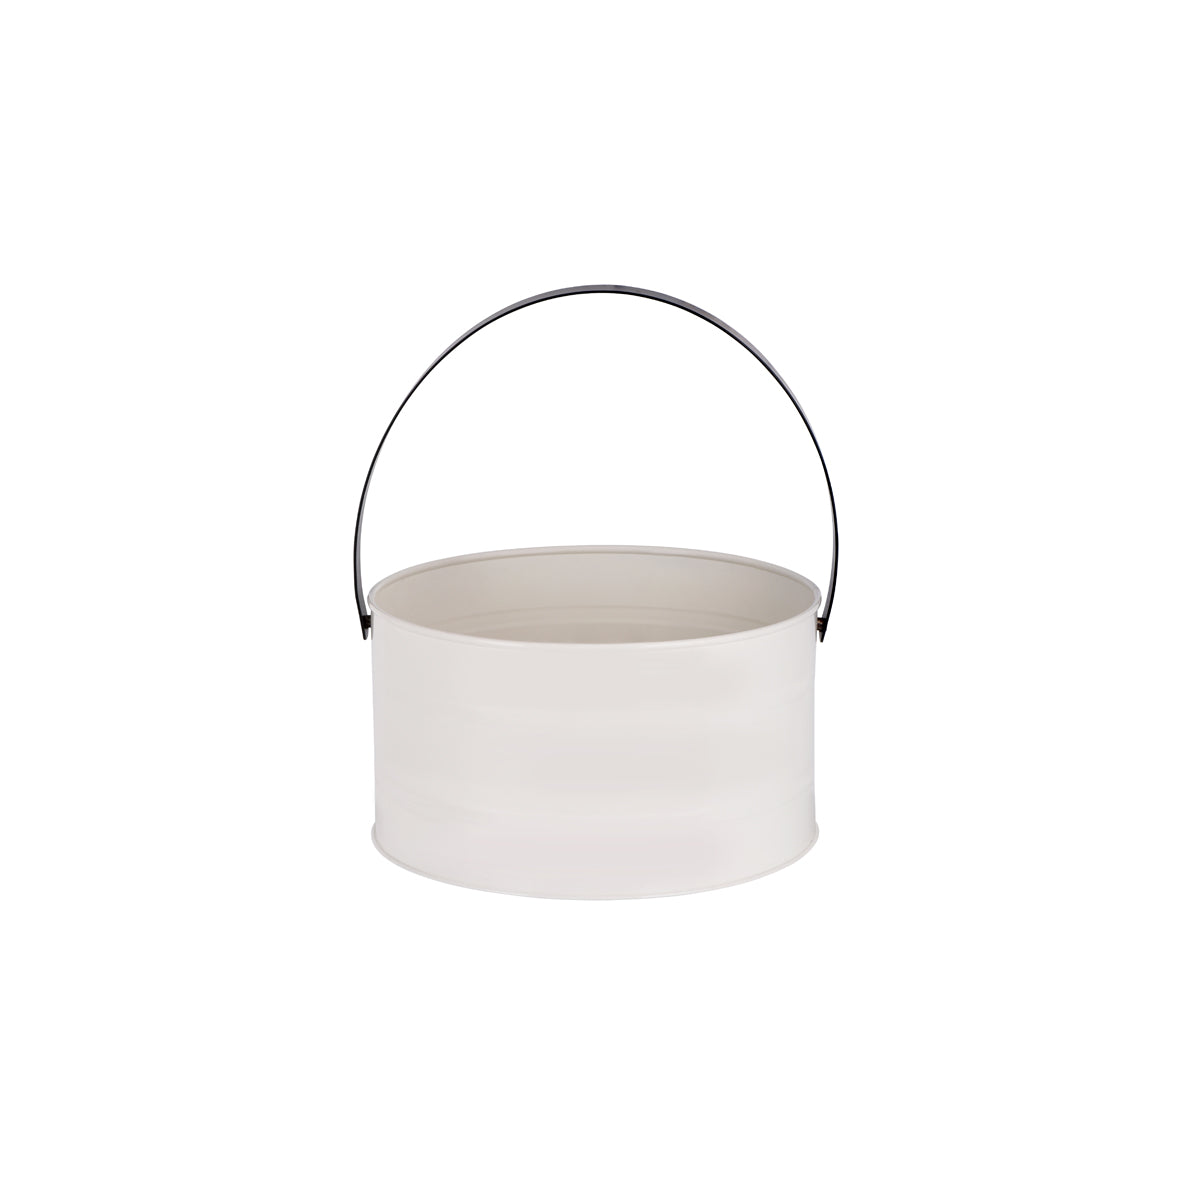 78840 Chef Inox Coney Island Creme Powder Coated Round Pail with Leather Handle 285x150mm Tomkin Australia Hospitality Supplies